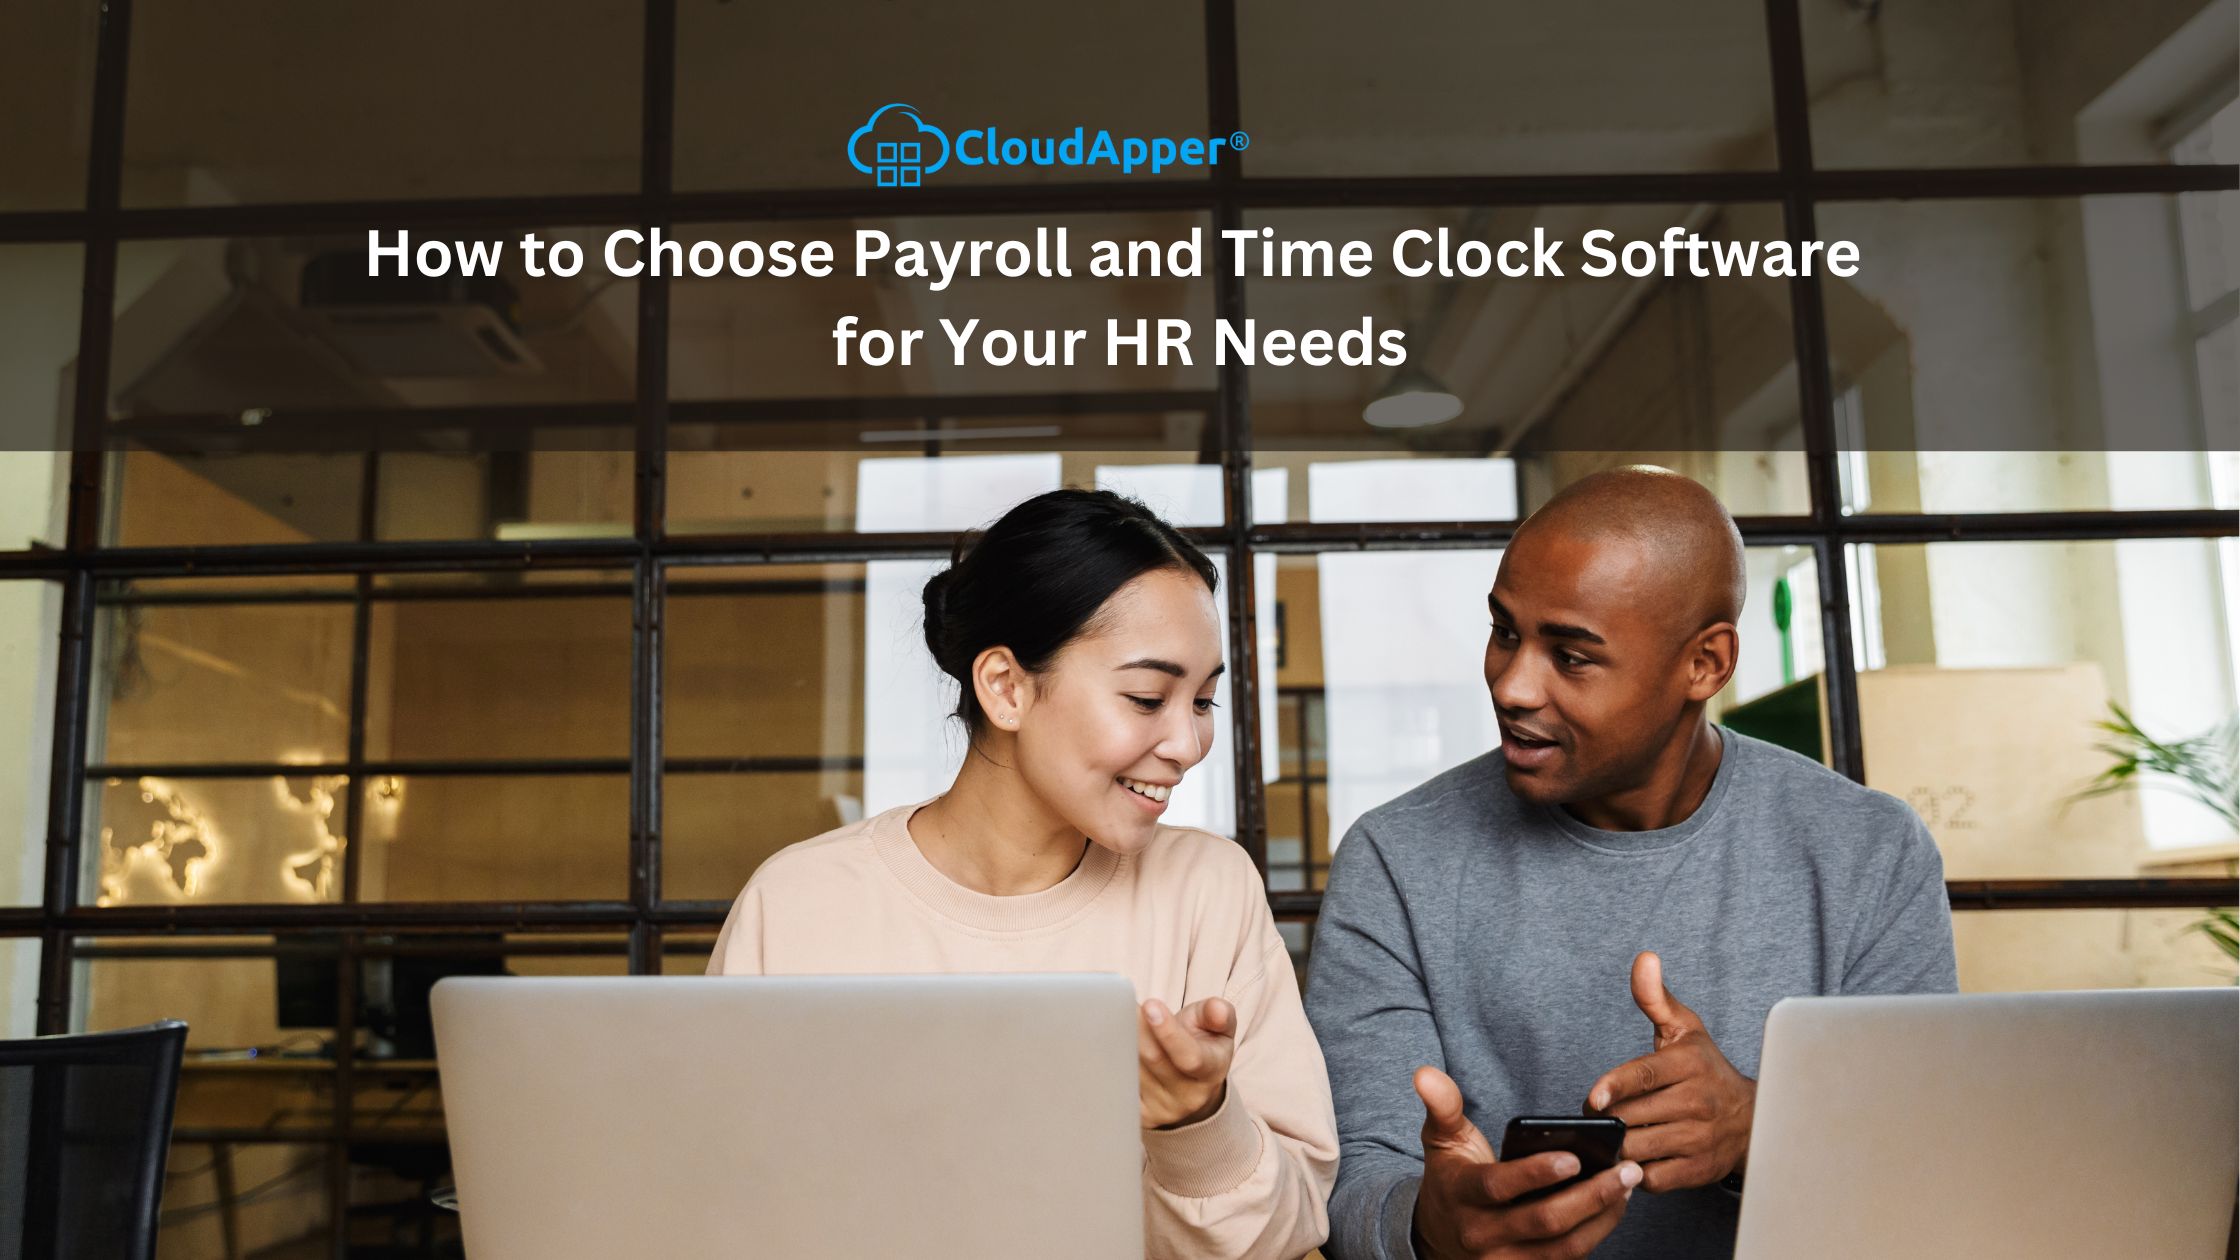 How to Choose Payroll and Time Clock Software for Your HR Needs